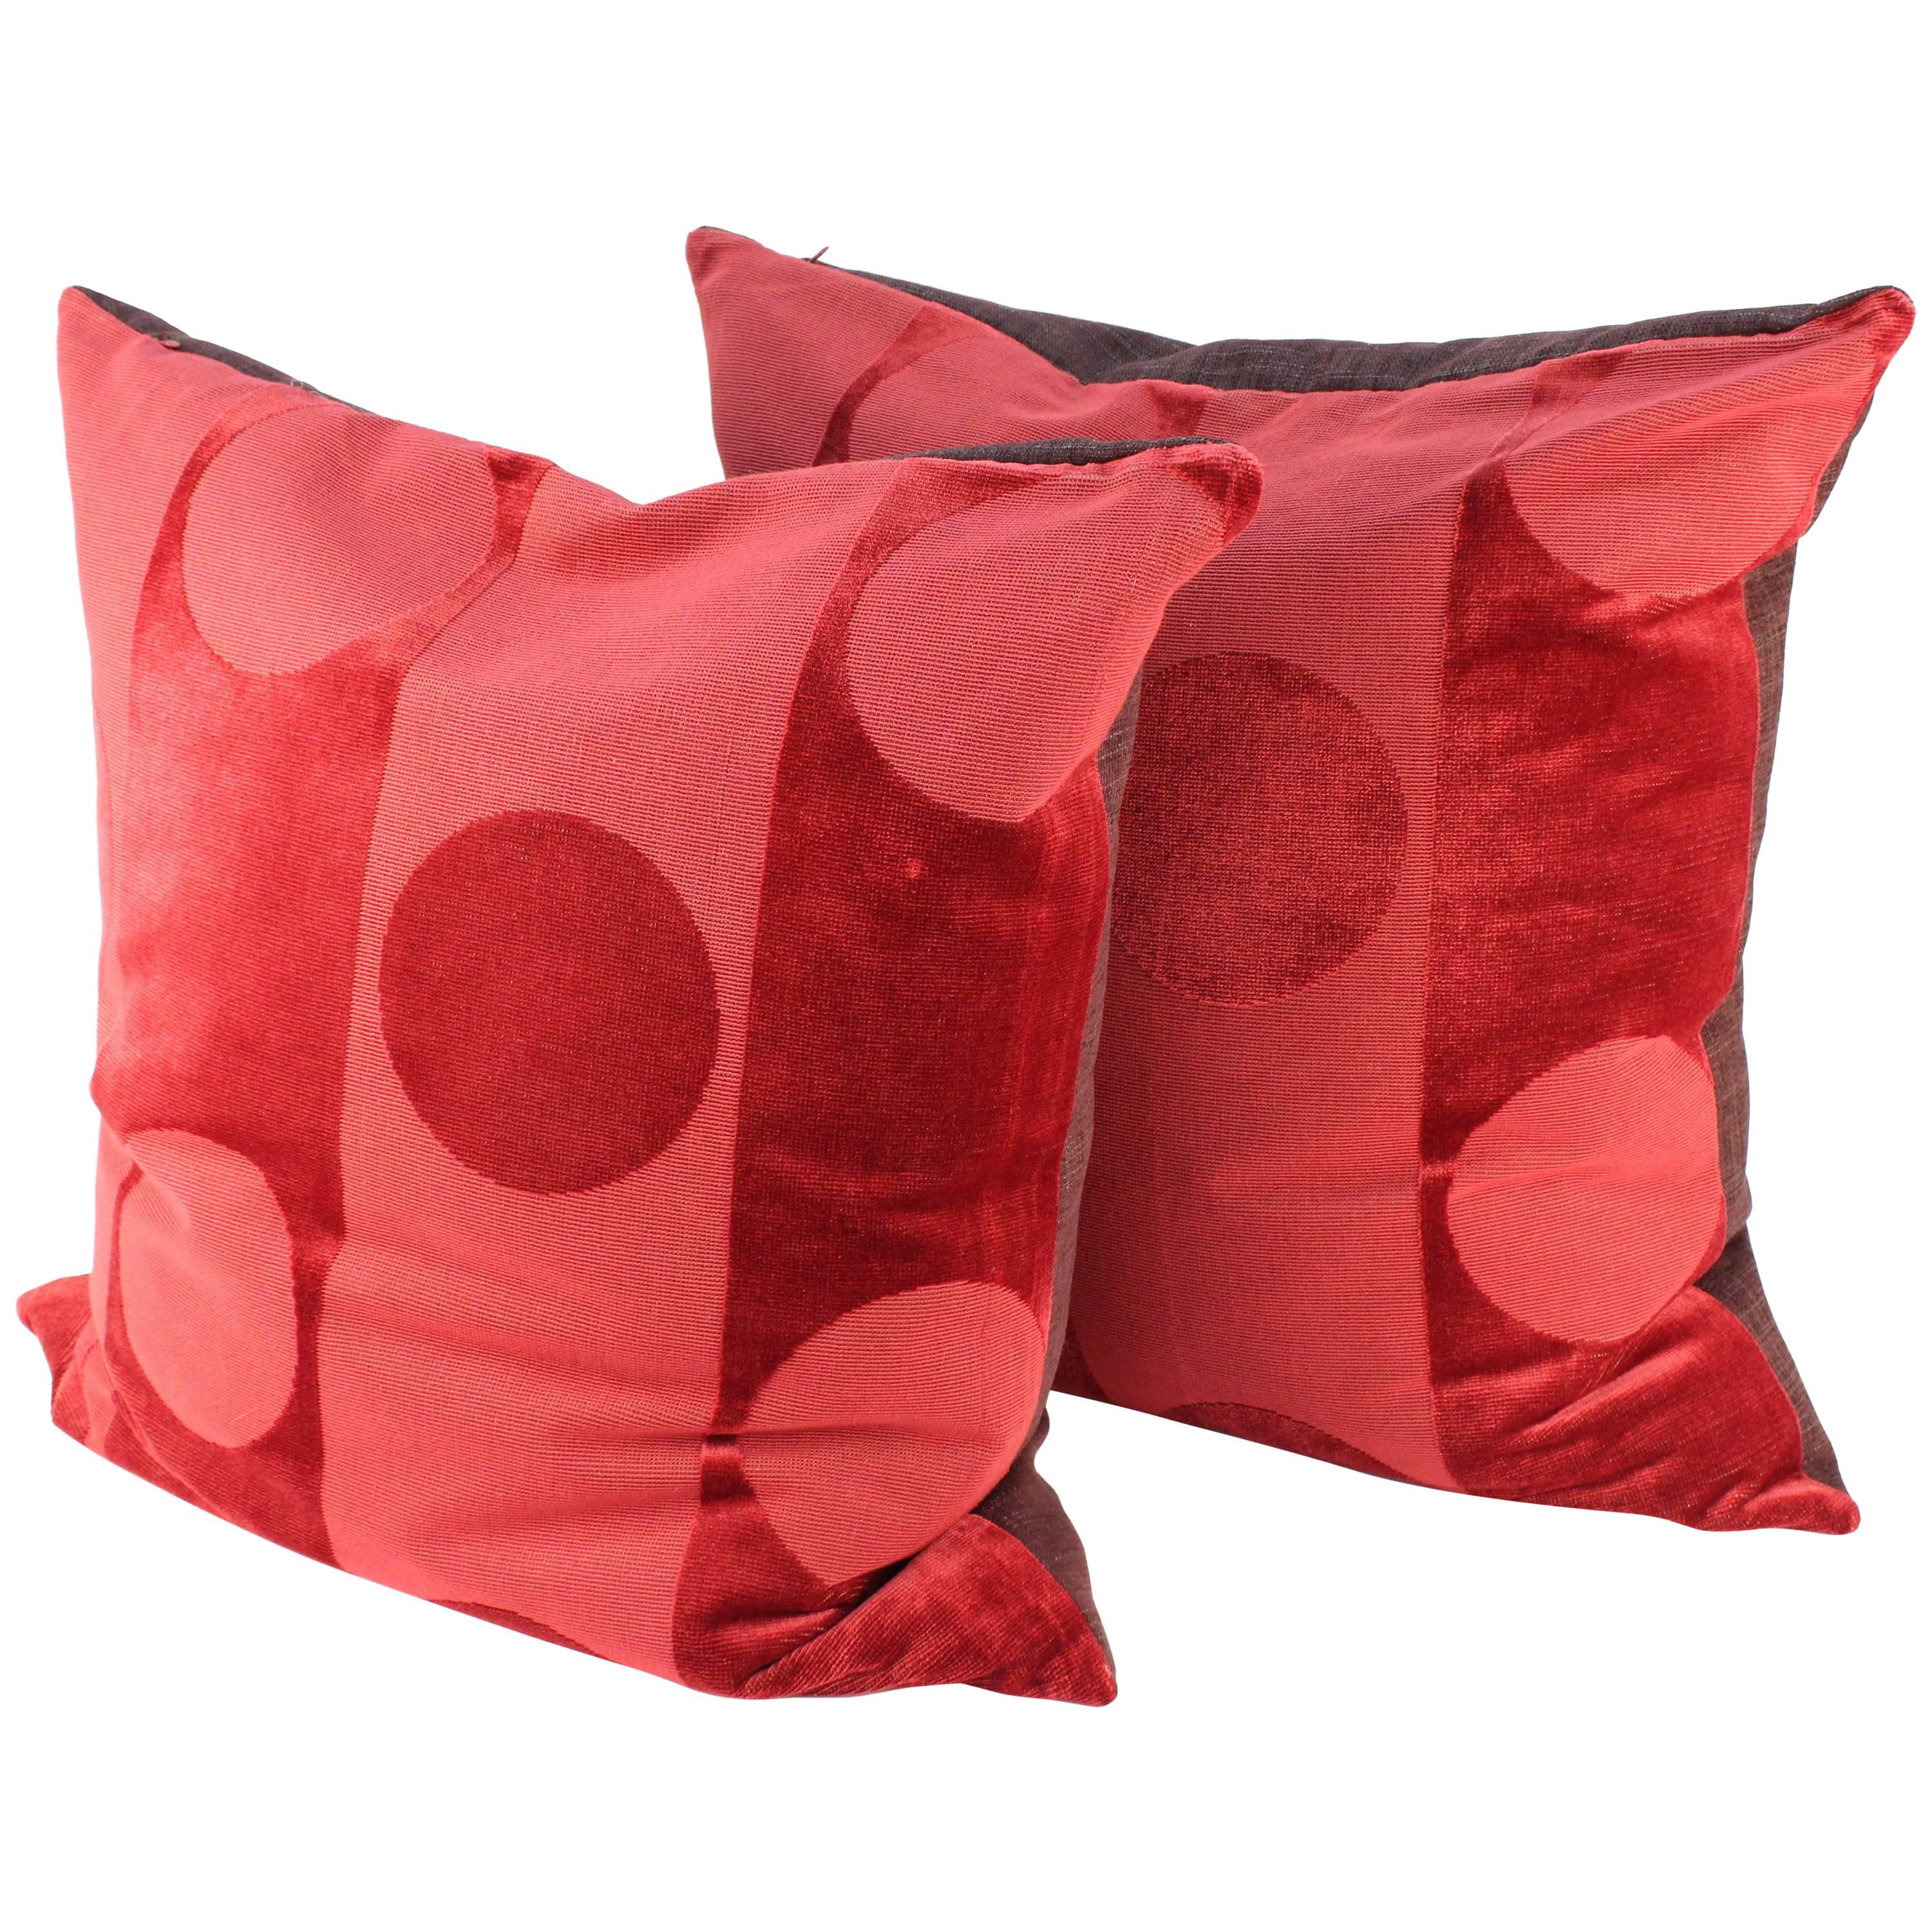 Pair of Pillows in Clarence House Fabric